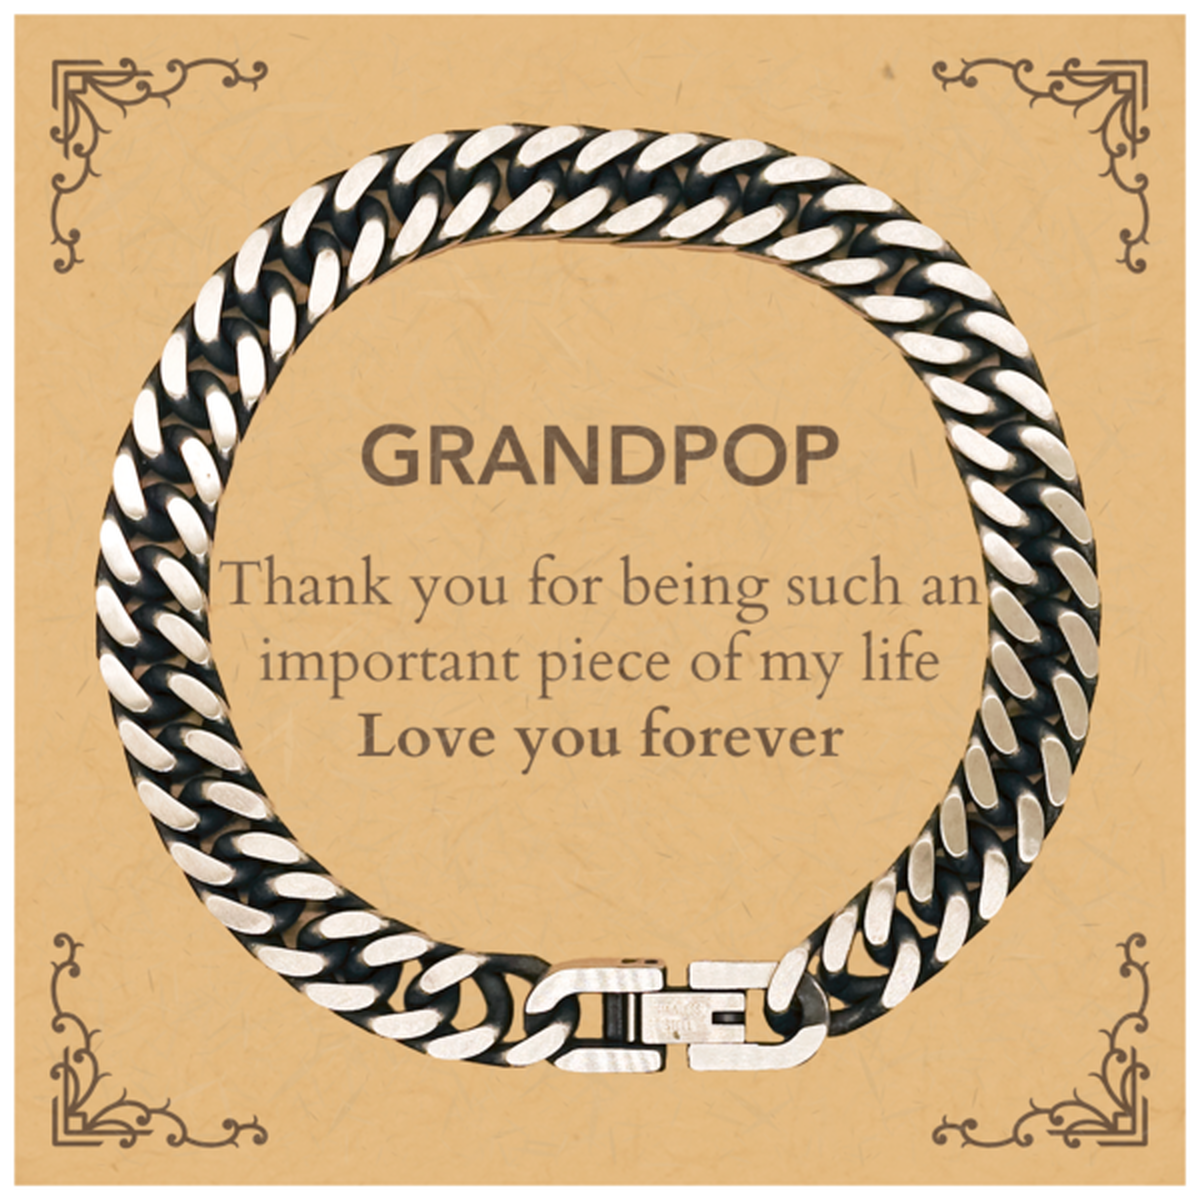 Appropriate Grandpop Cuban Link Chain Bracelet Epic Birthday Gifts for Grandpop Thank you for being such an important piece of my life Grandpop Christmas Mothers Fathers Day